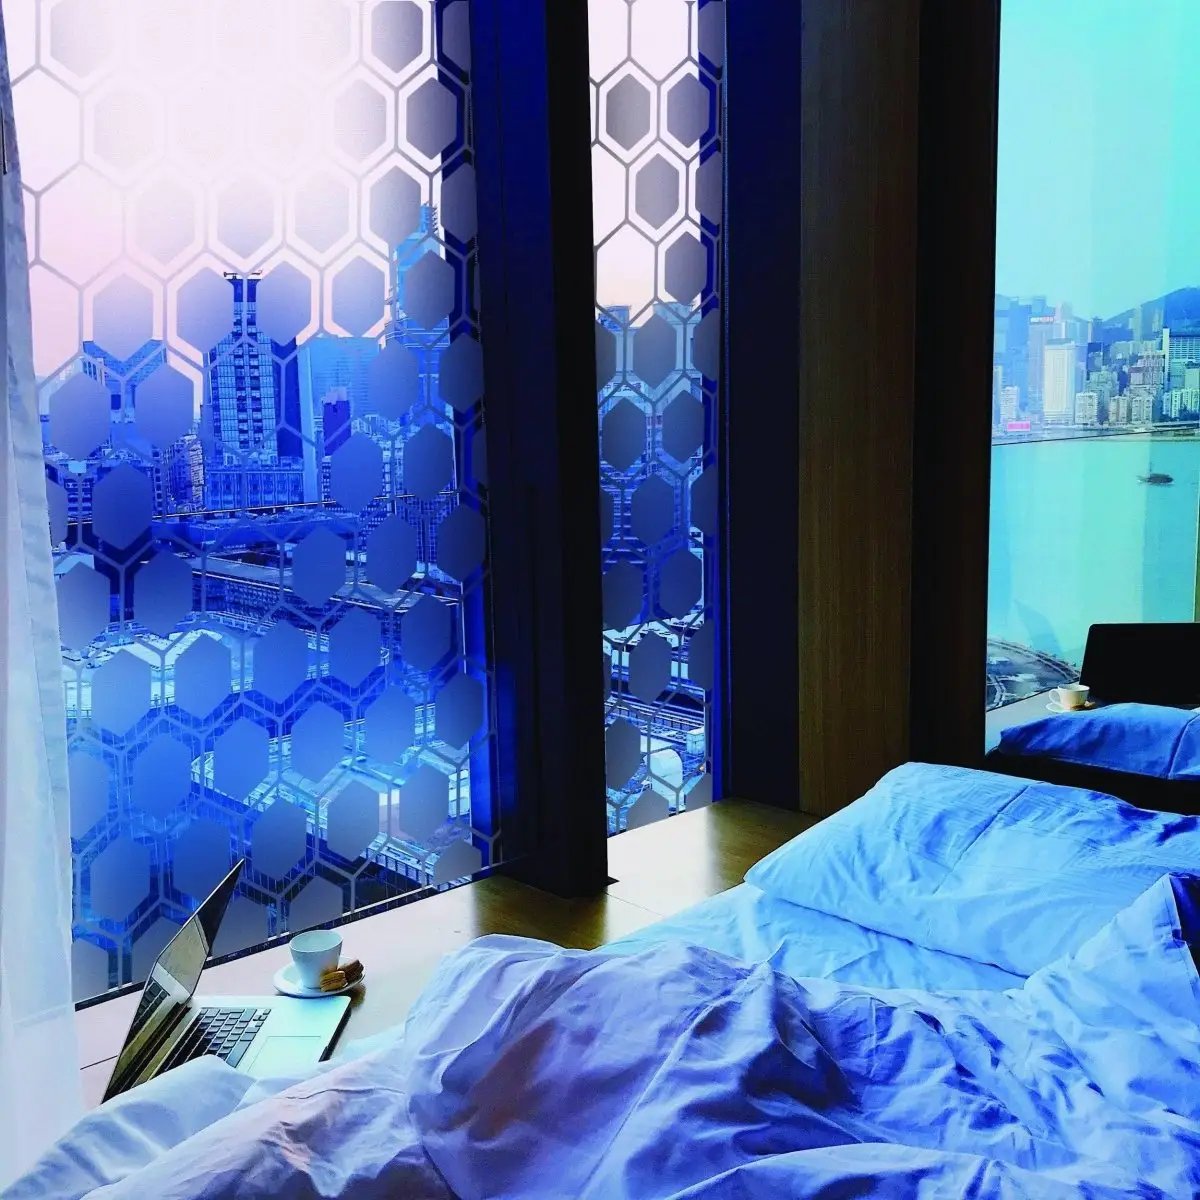 Elegant Privacy Window Film - Stylish Solution for Brighter, Private Spaces - Decords